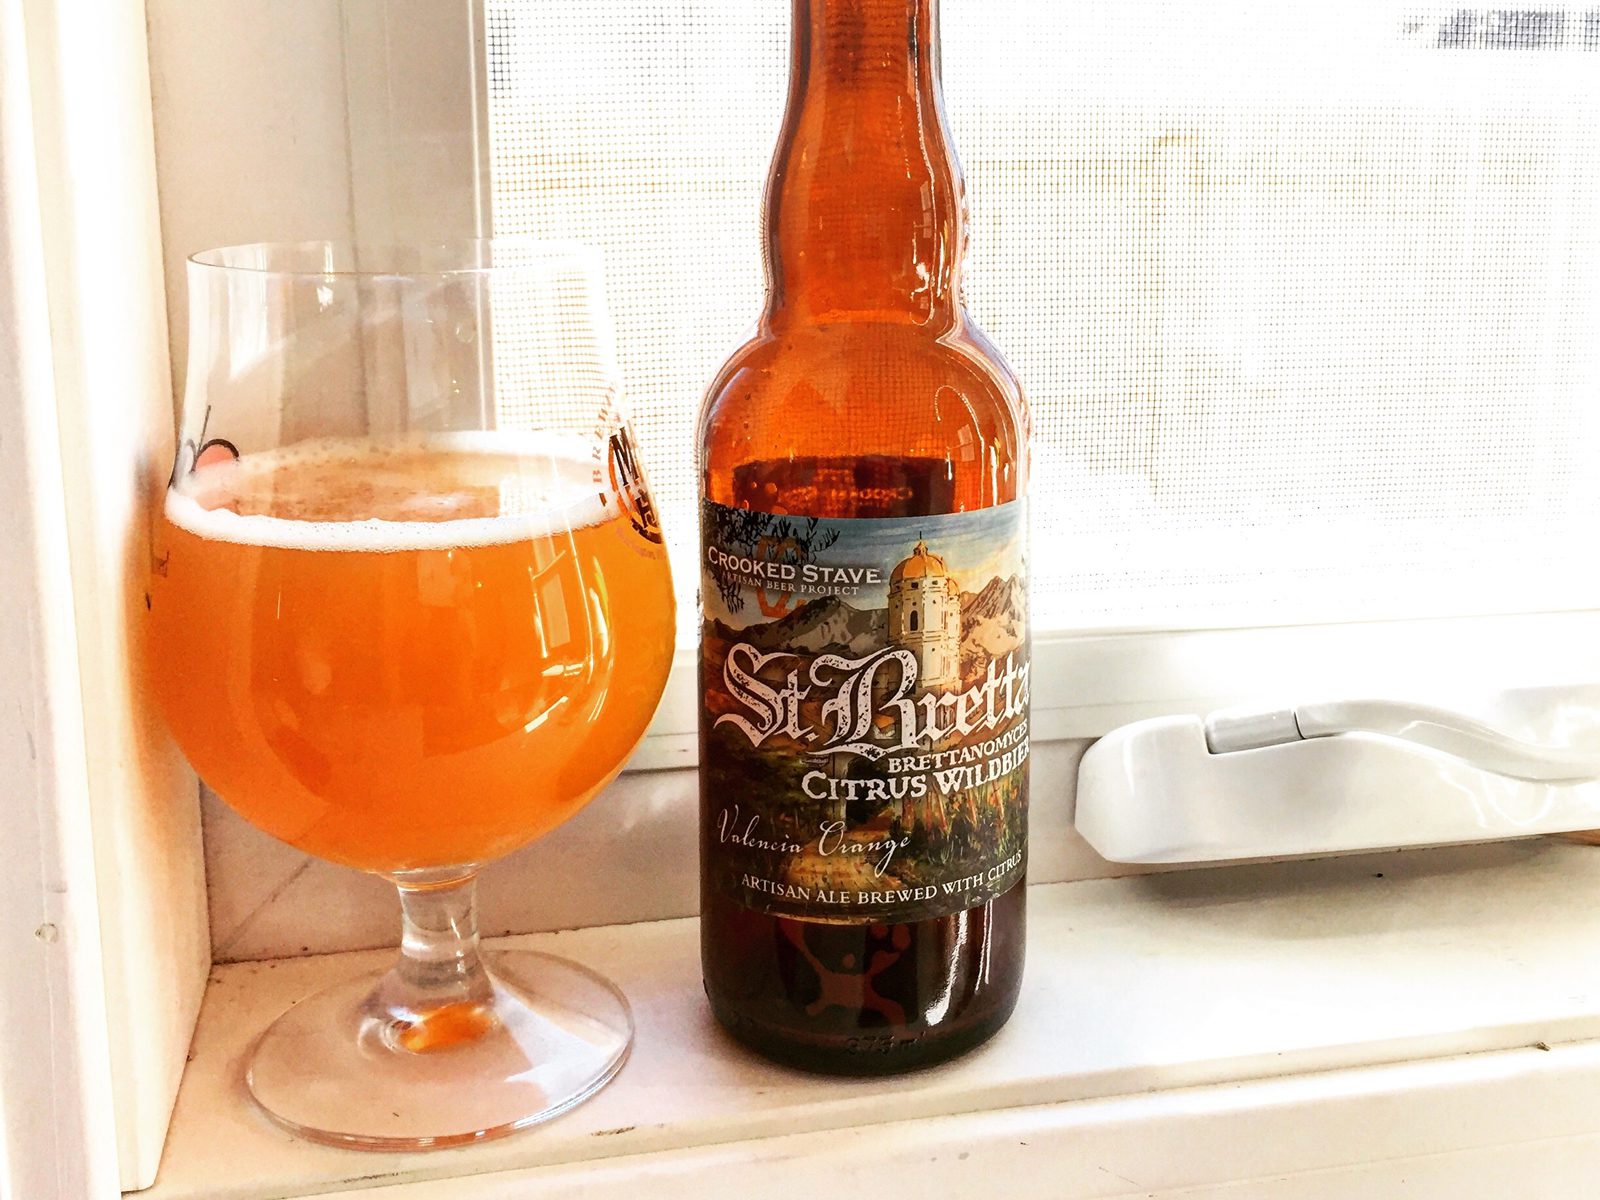 Crooked Stave Artisan Beer Project: St. Bretta